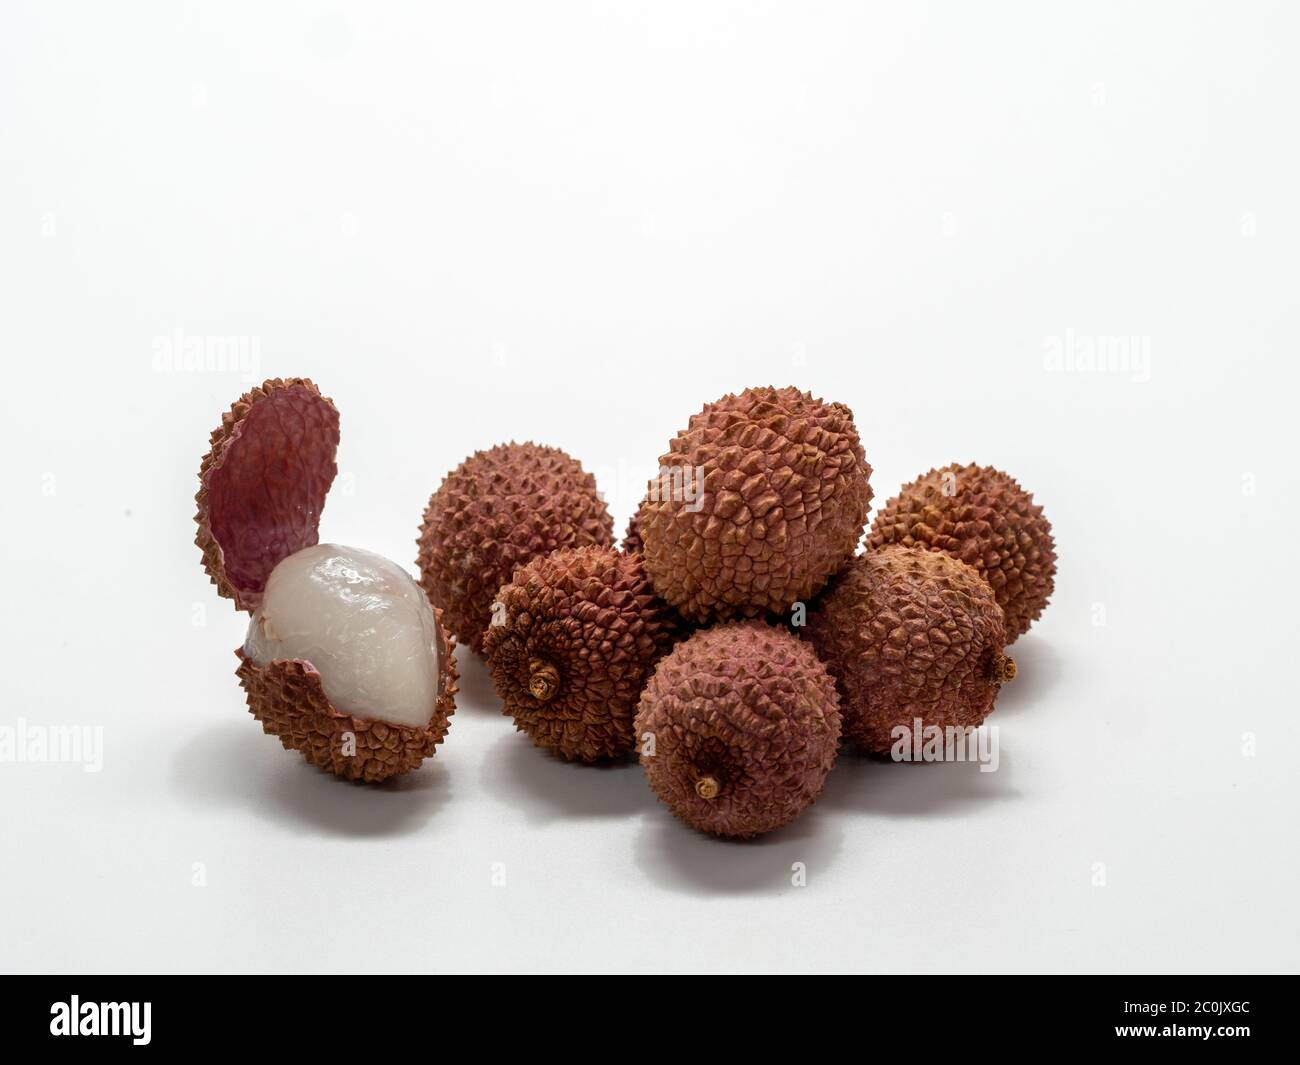 Several lychee fruits, one with open peel. Stock Photo